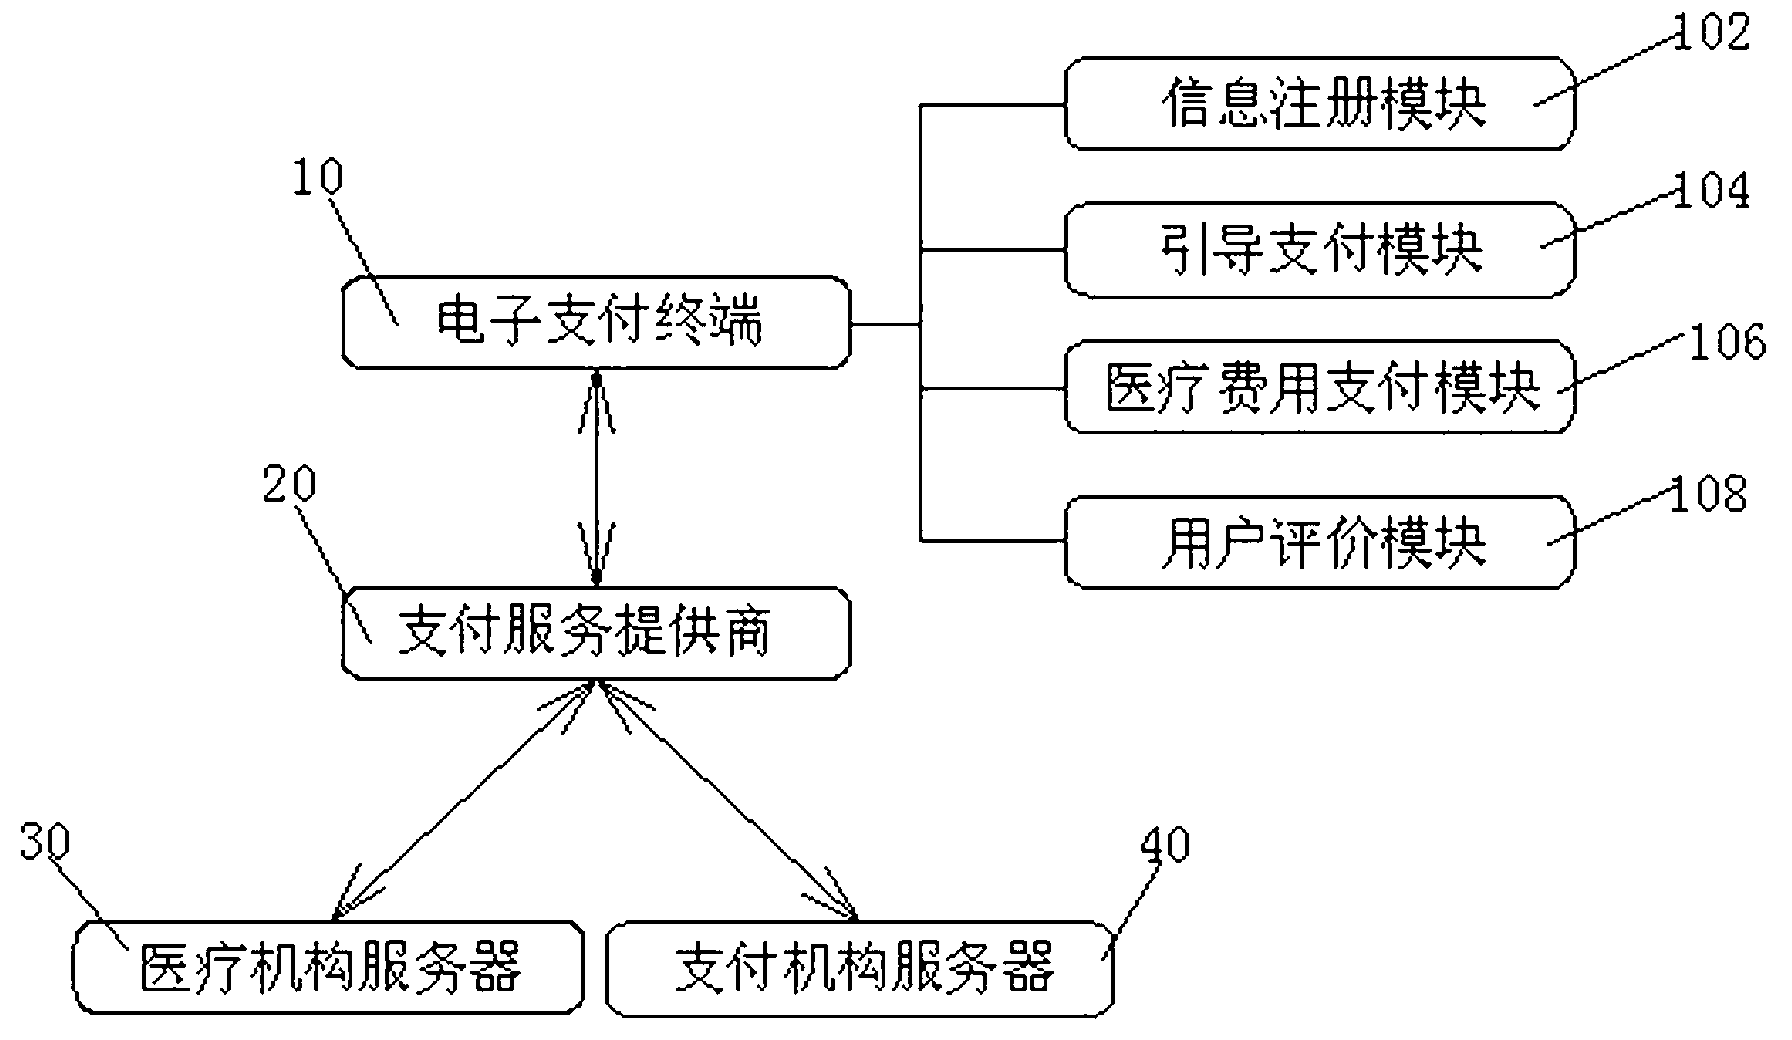 Medical service payment system based on electronic payment